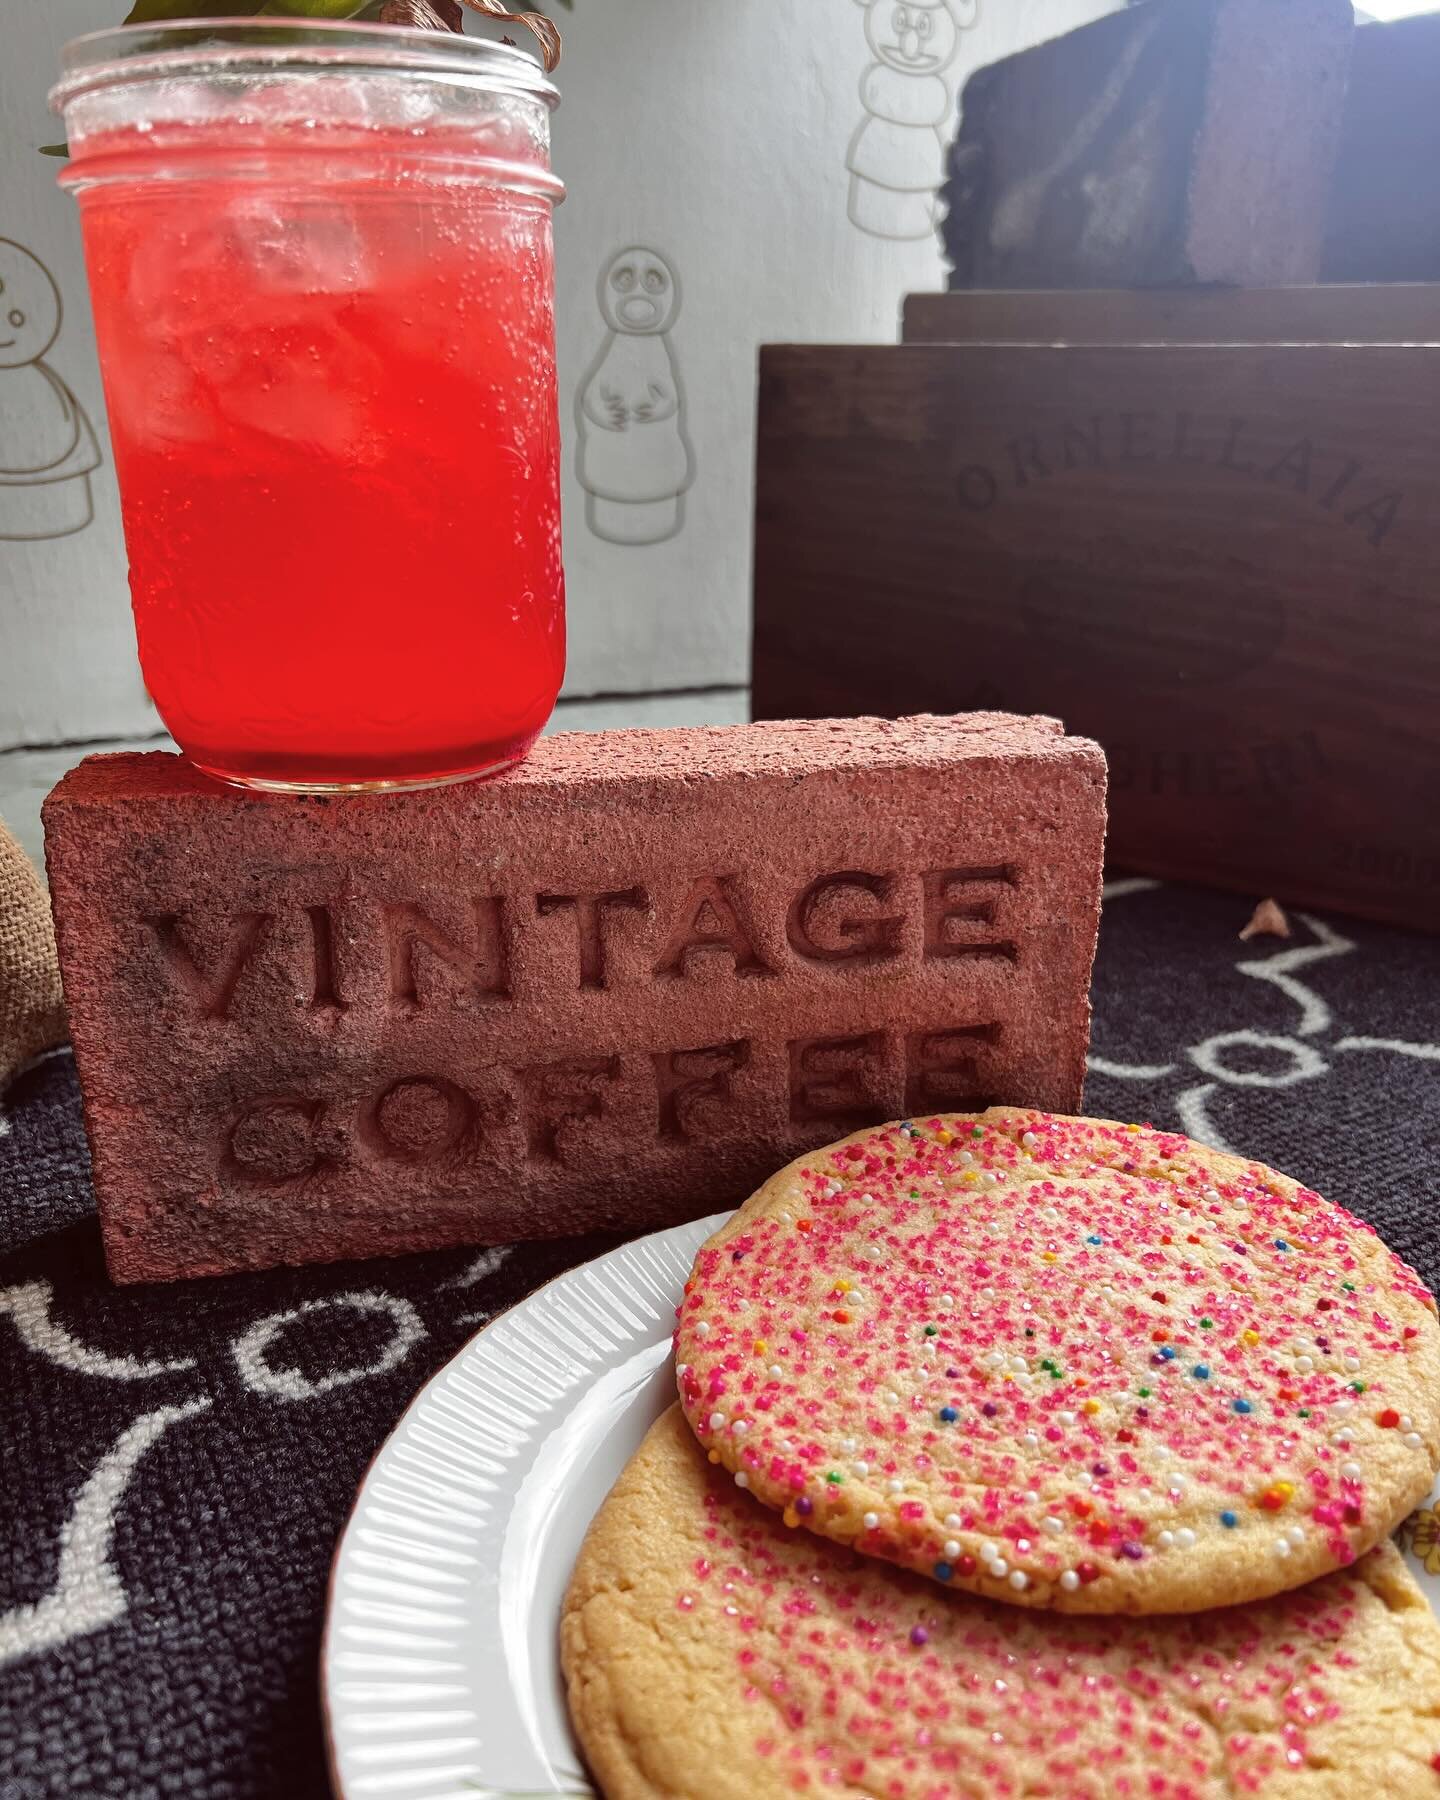 Get into the spirit of love tomorrow with some festive themed specials we&rsquo;ll have going in the shop! Cool down those flames in your heart with our Love Potion (a cinnamon heart &amp; raspberry sparkling soda) OR get that sweet fix with a pink s